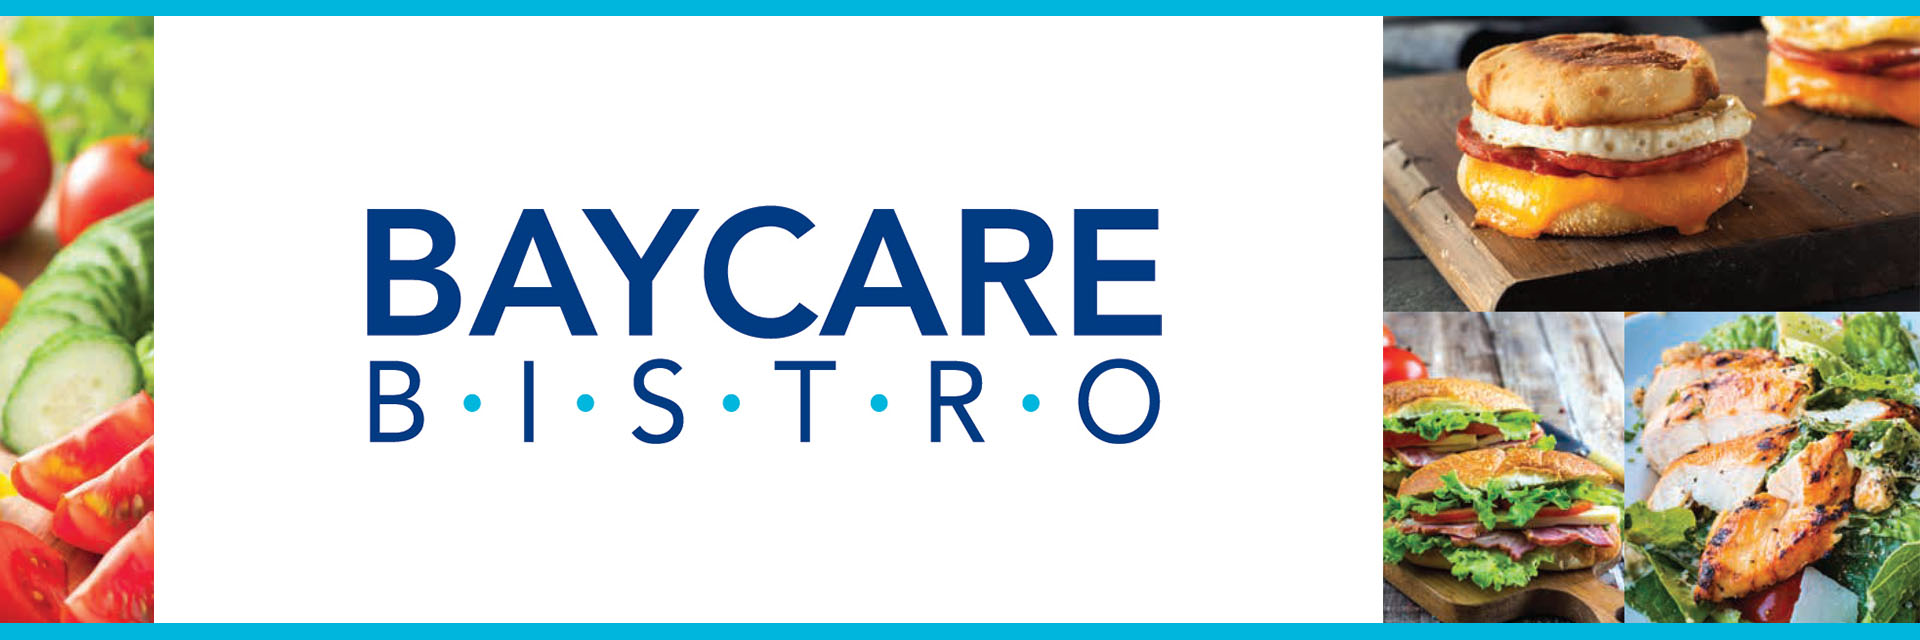 BayCare Bistro logo and photos of a salad and sandwiches